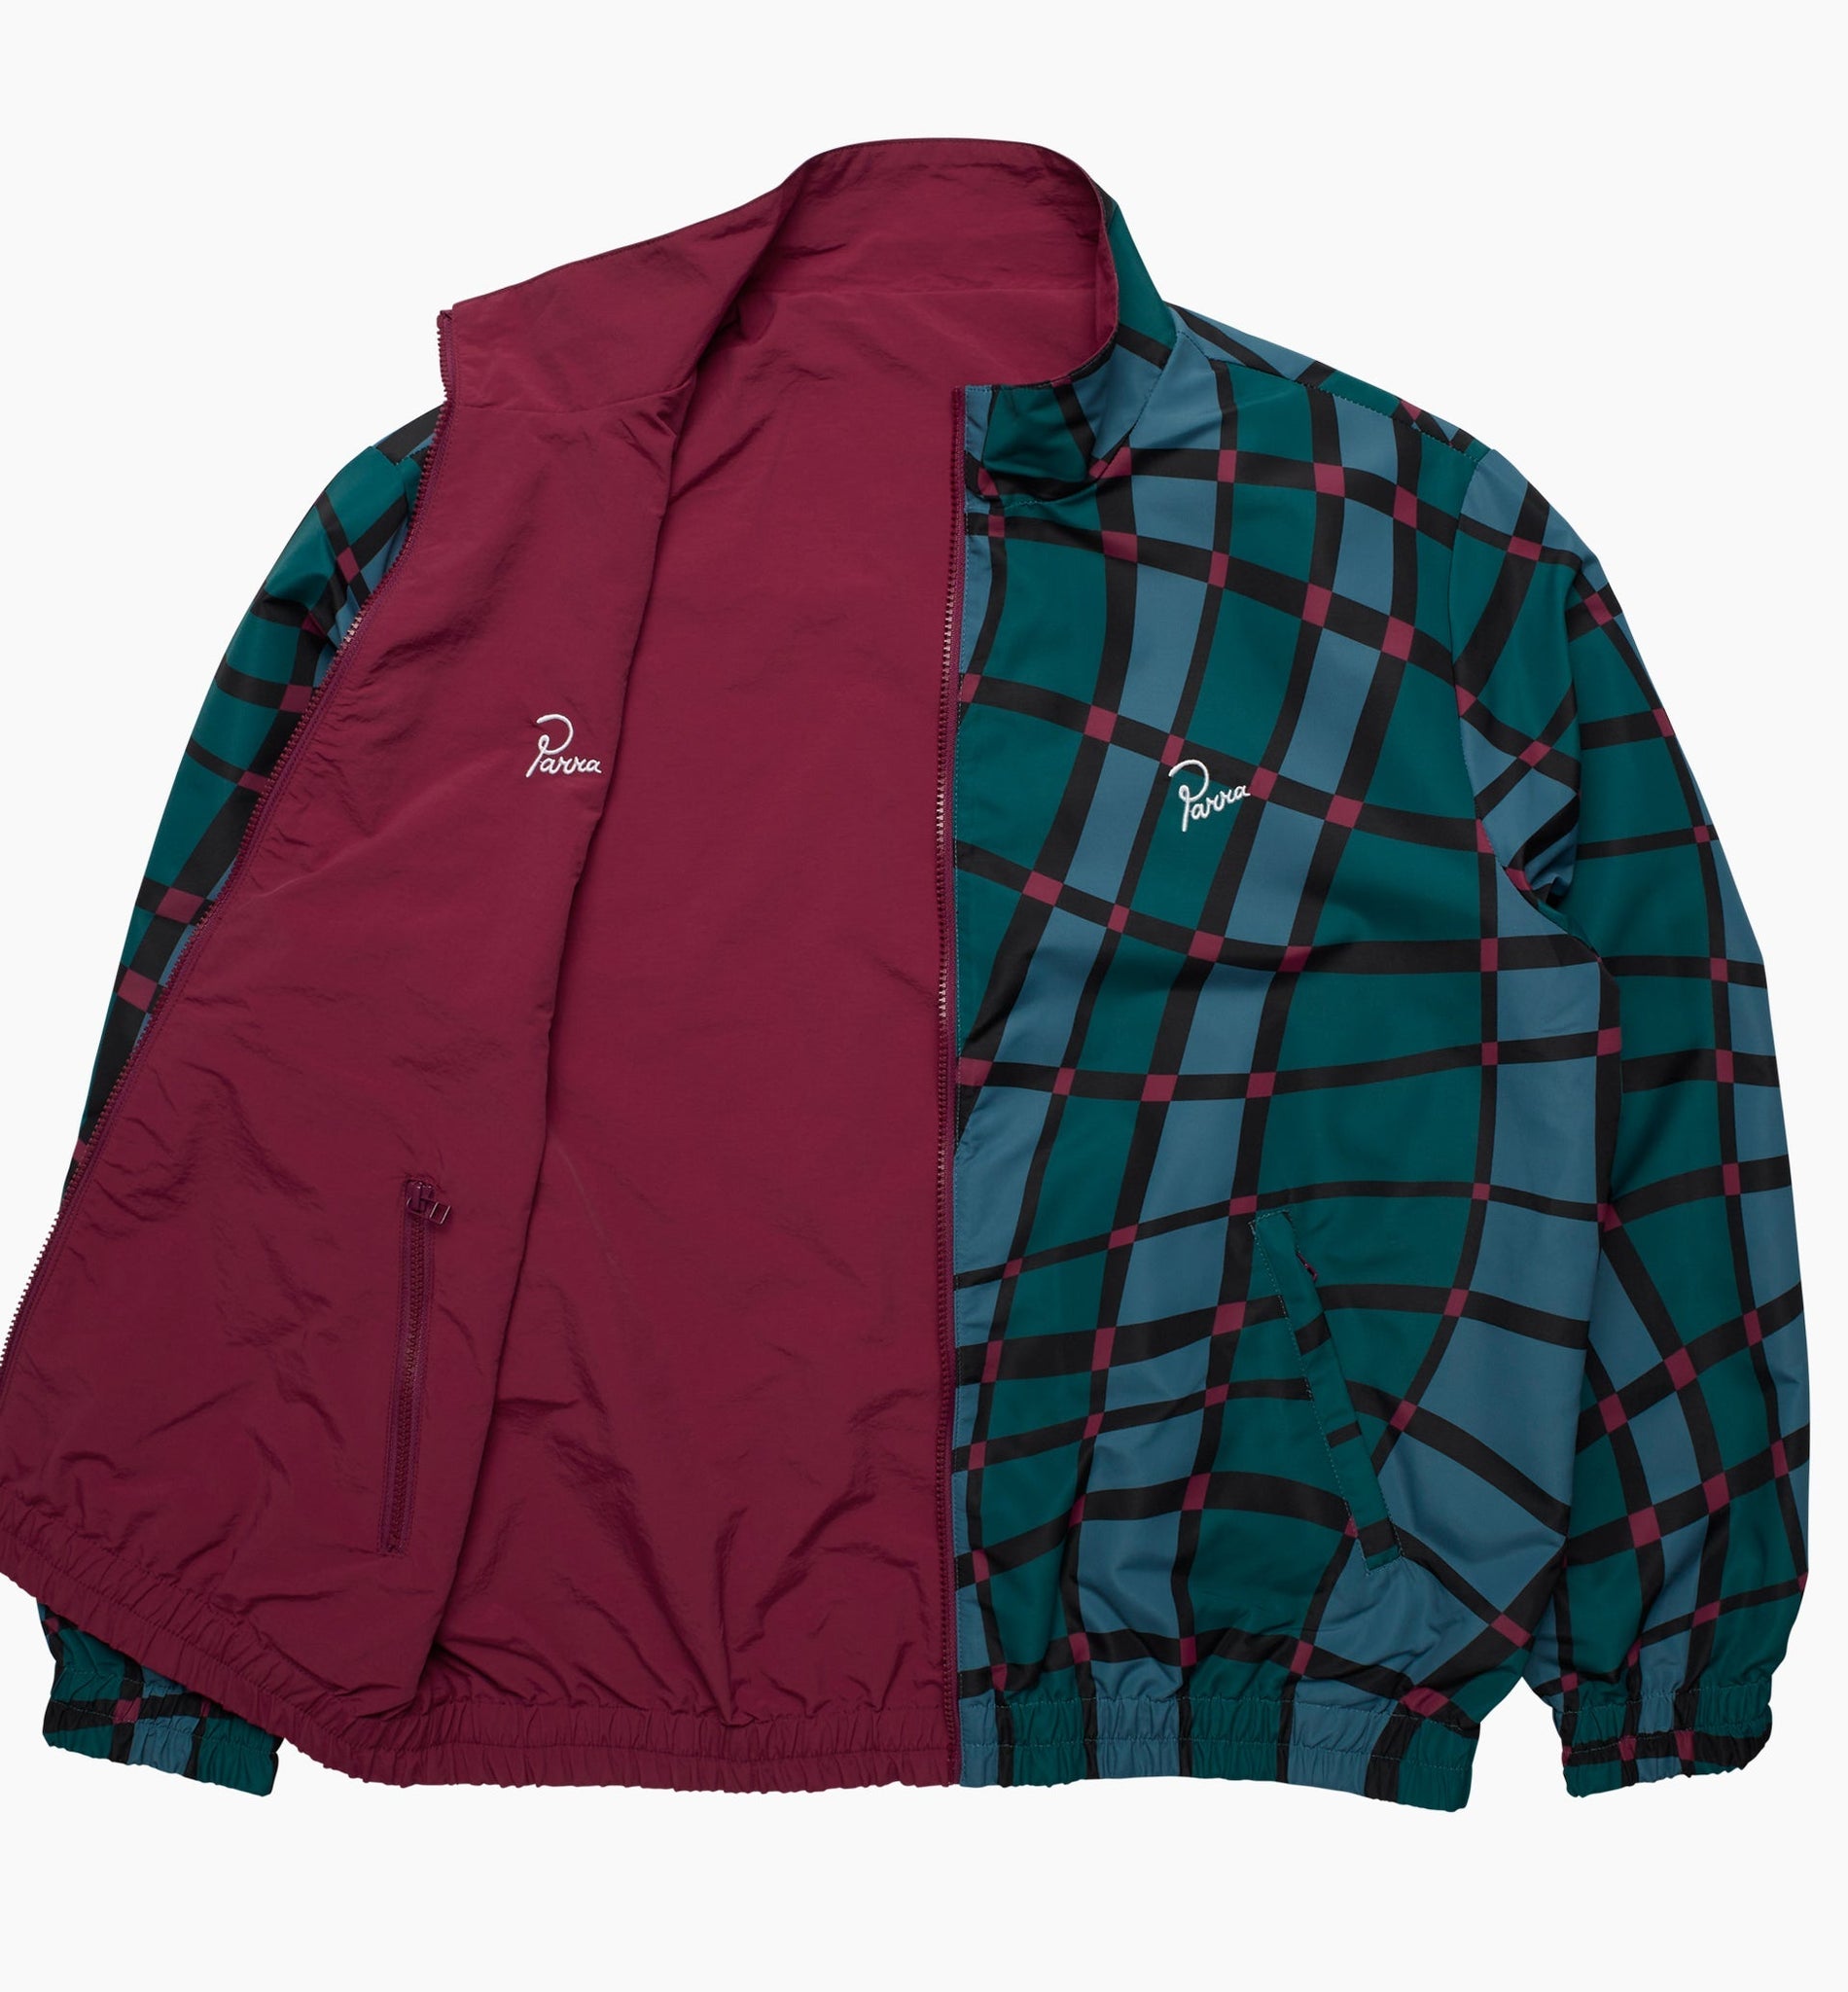 Squared Waves Pattern Track Top